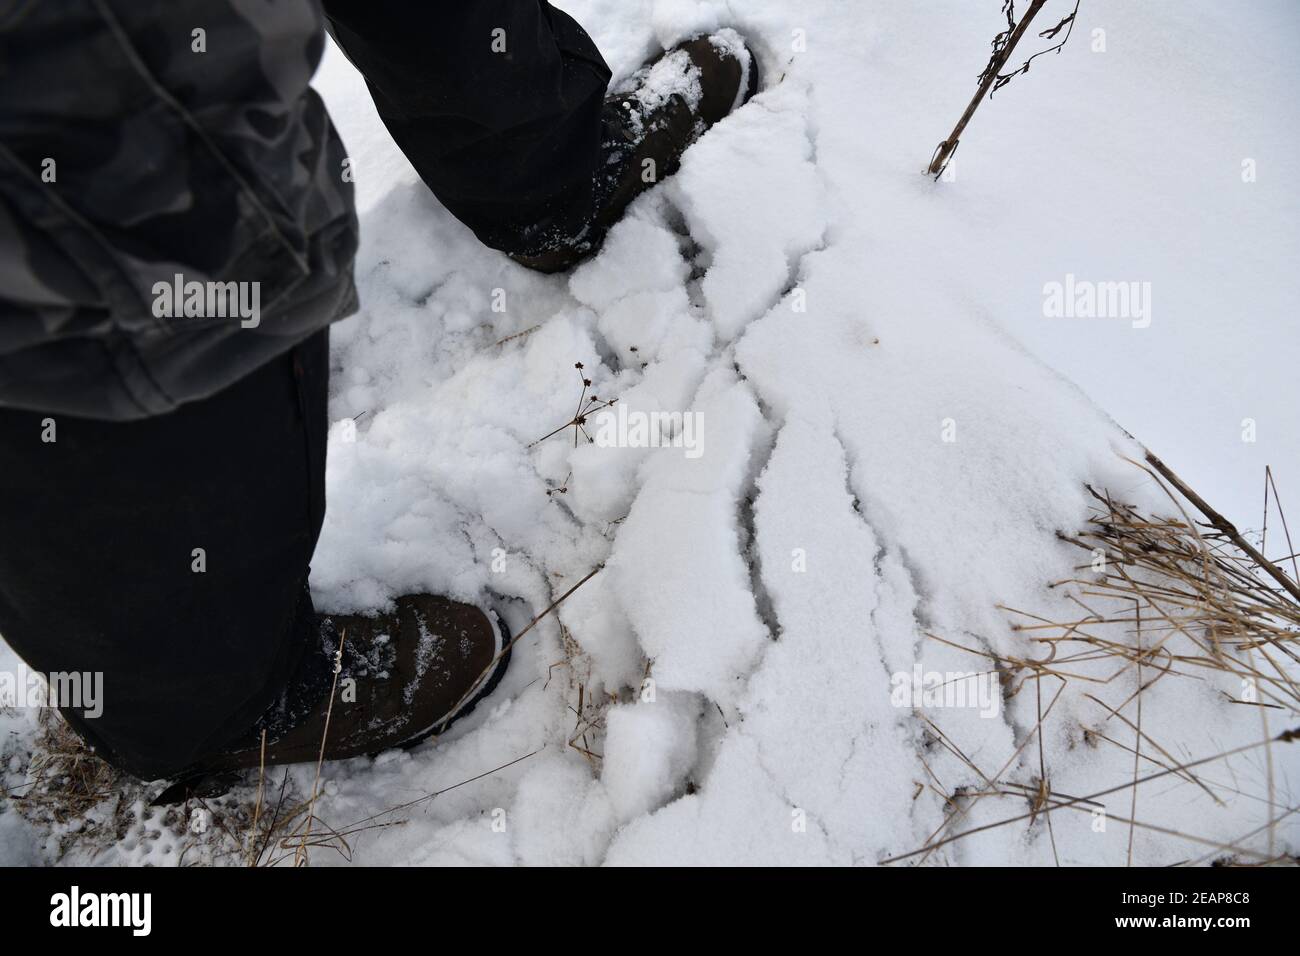 The hunter walks in the snow in a shoe resistant to snow and ice Stock Photo